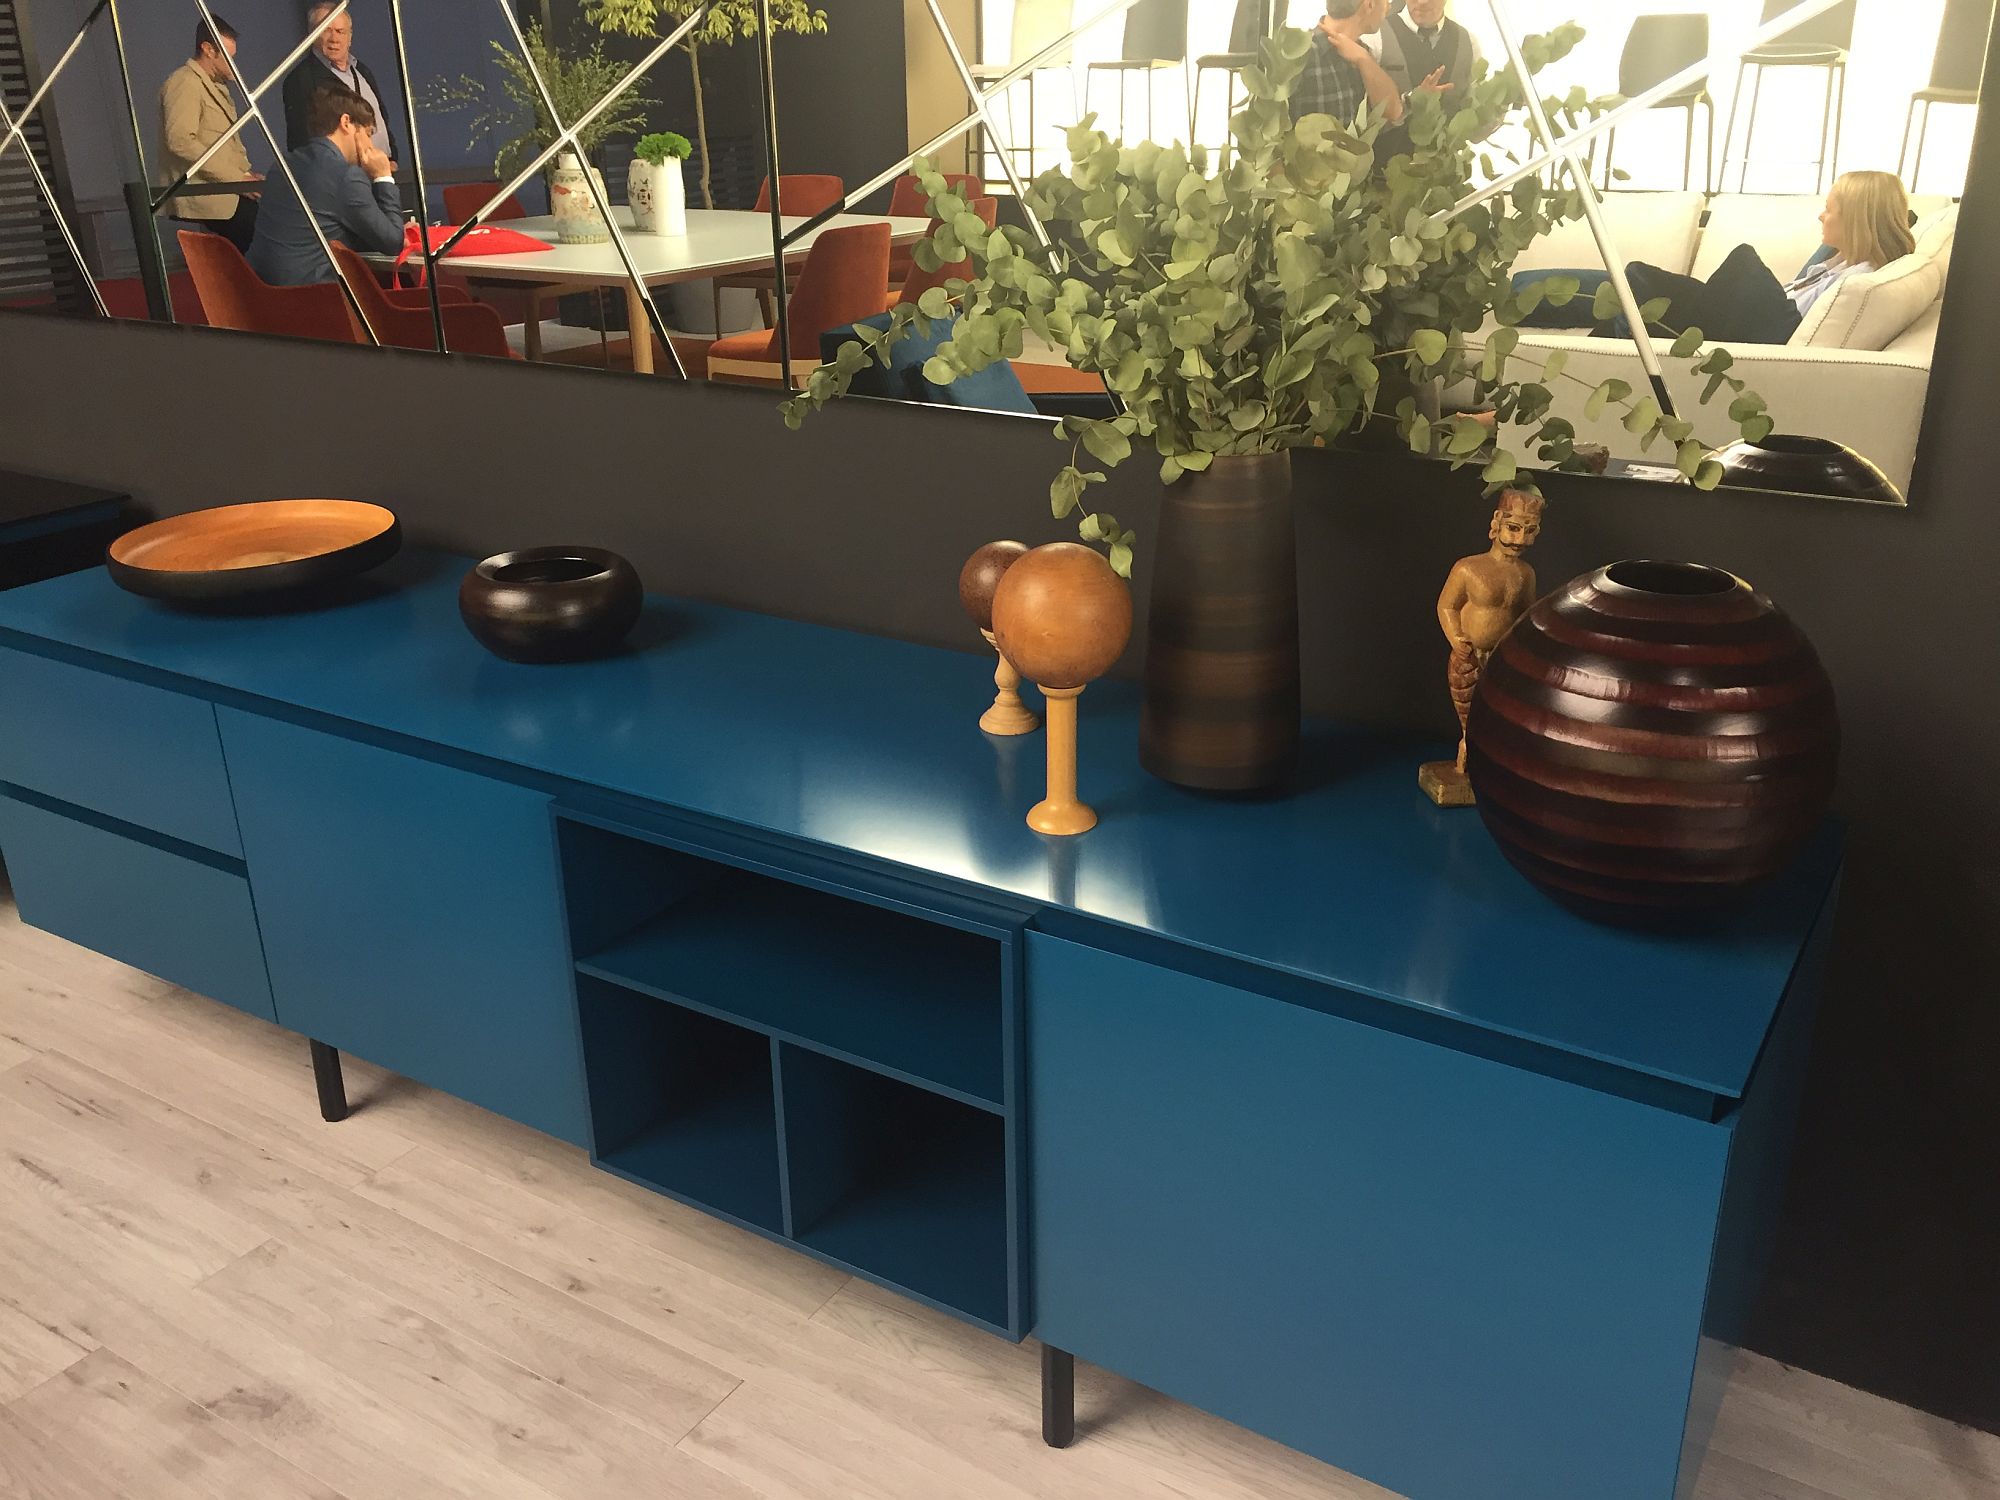 Dashing-living-room-sideboard-in-blue-with-multiple-drawers-and-cabinets